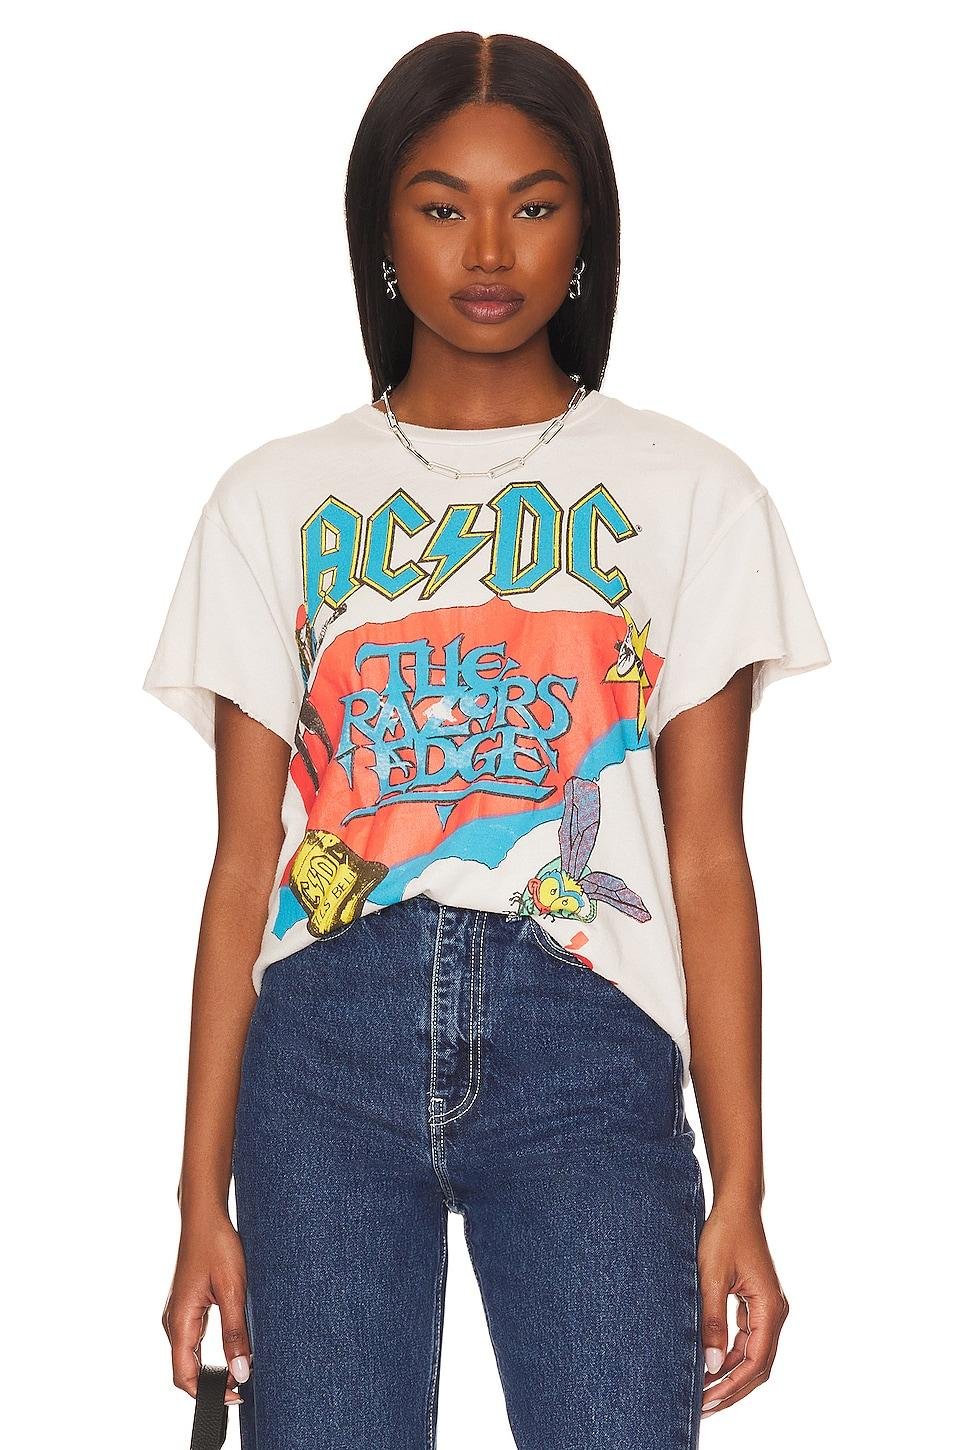 acdc tee by MADE WORN